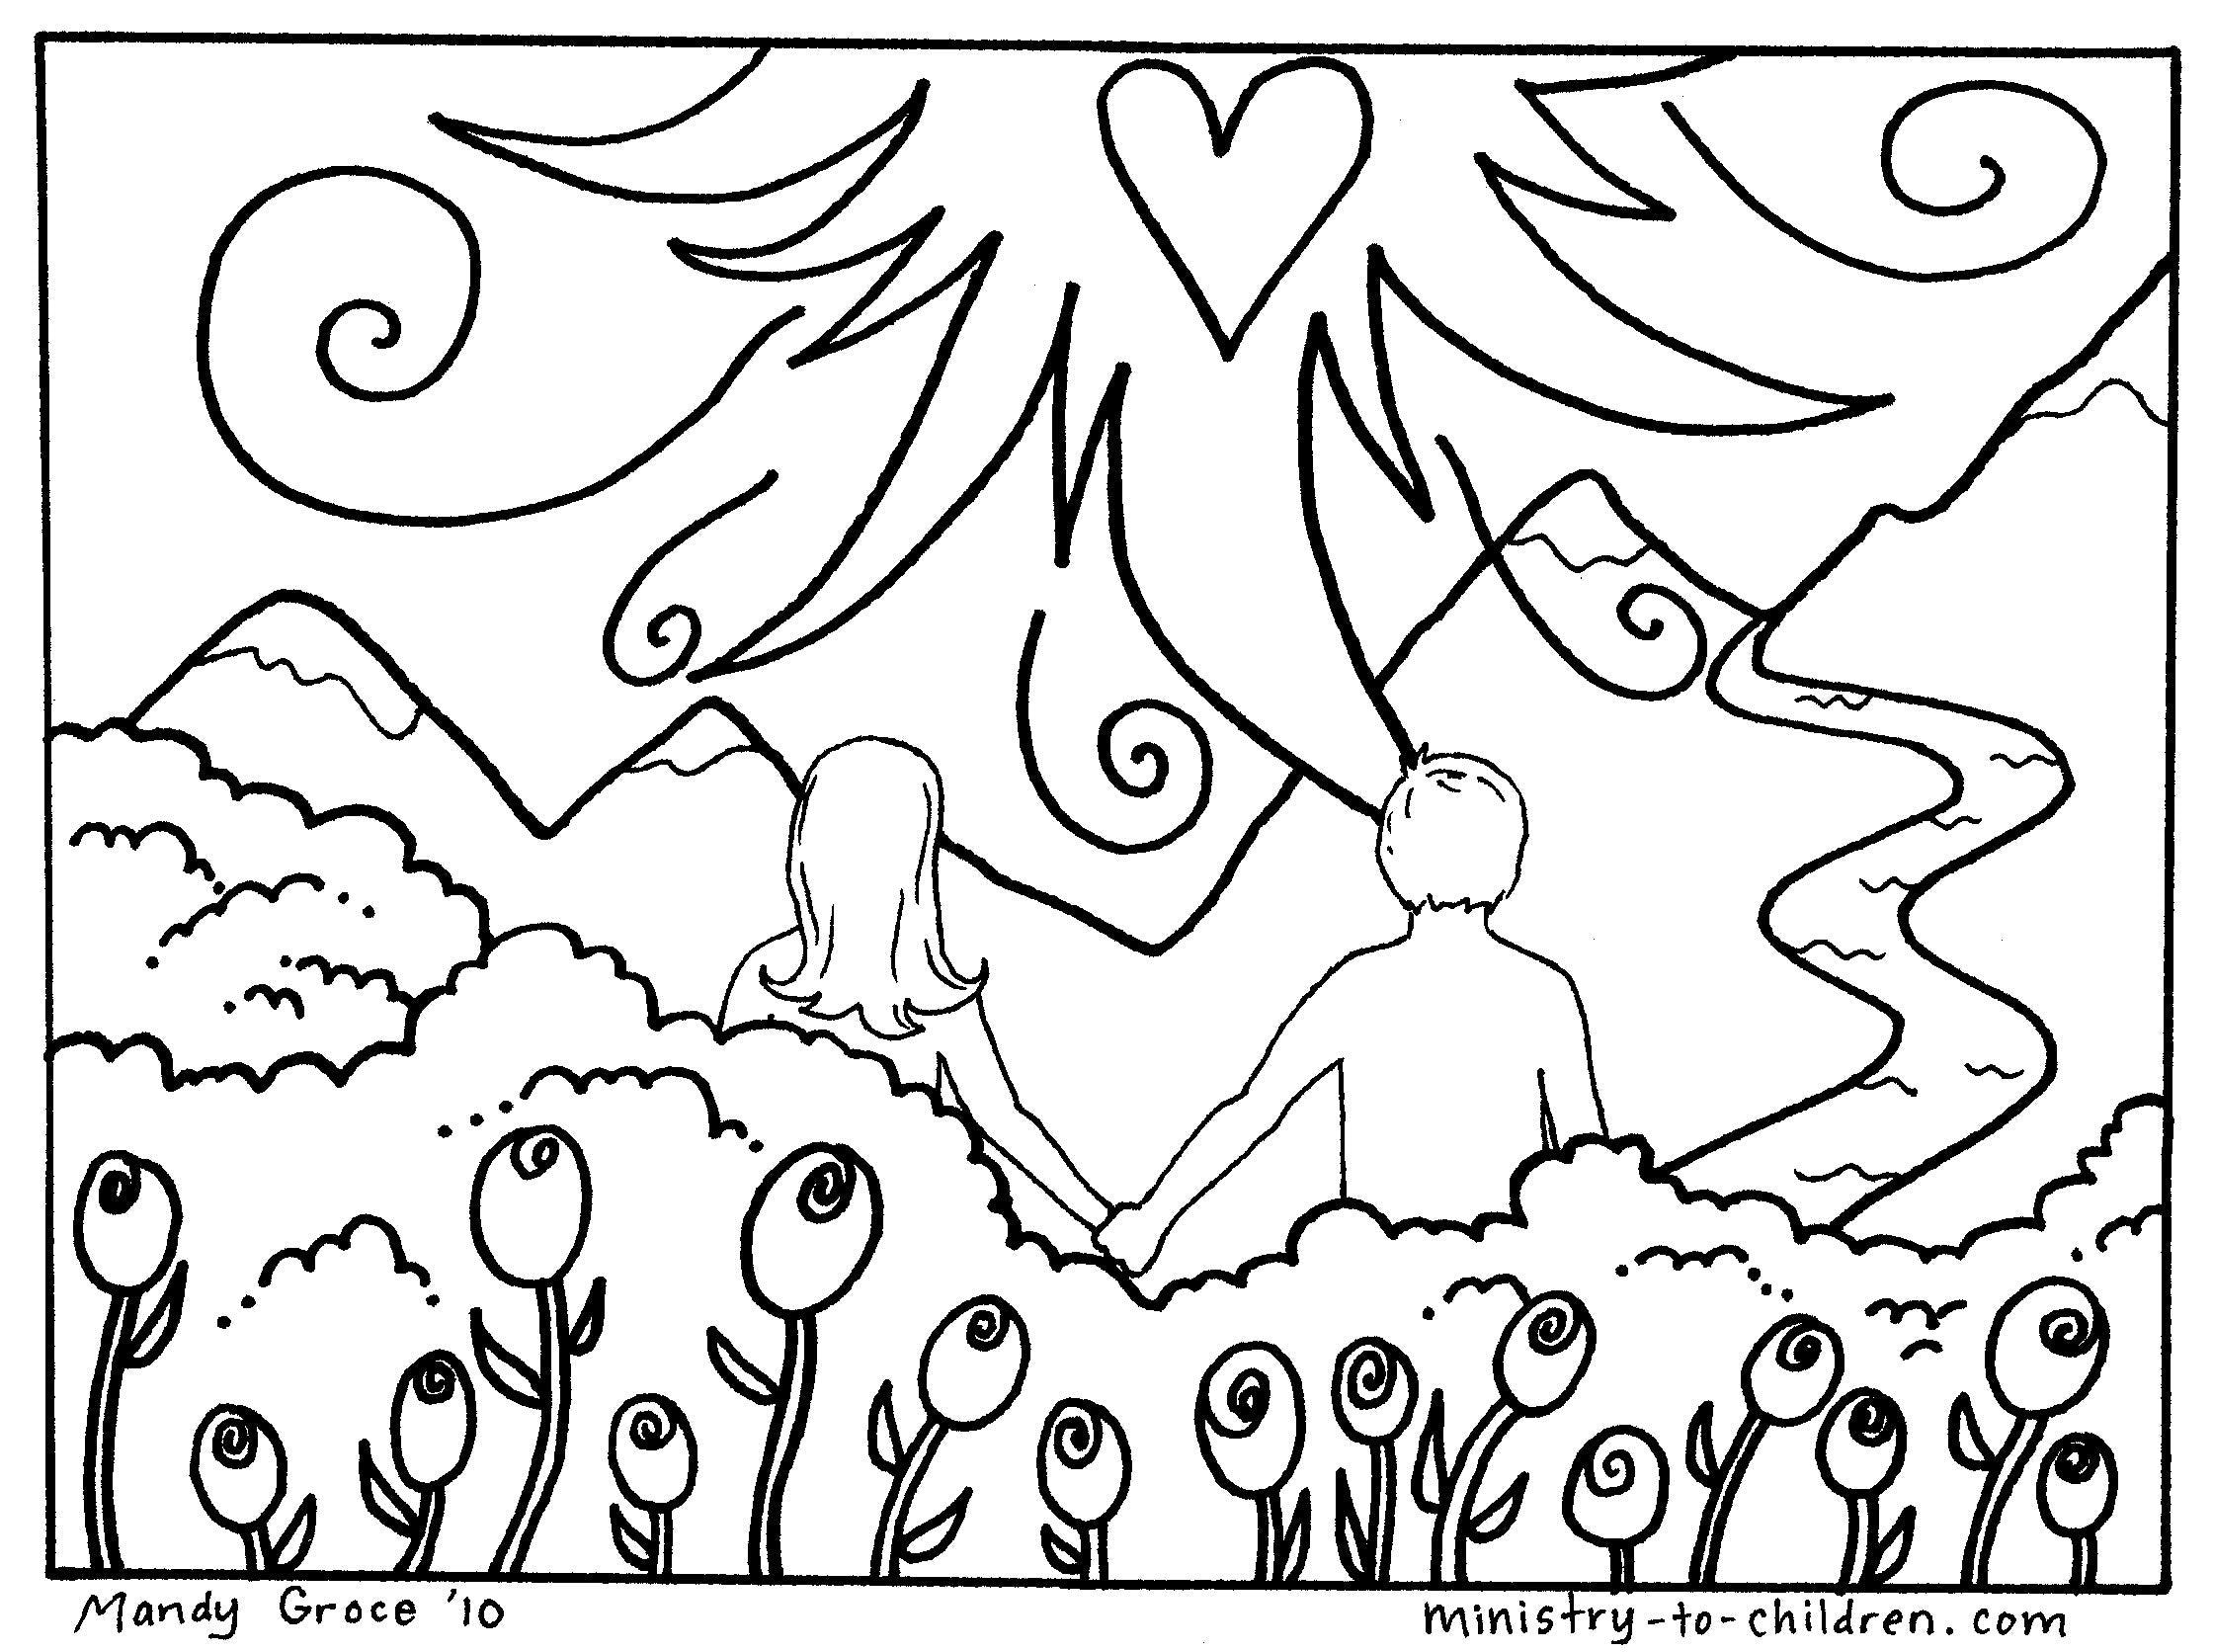 6 ways to use coloring pages with teens + 16 free coloring sheets